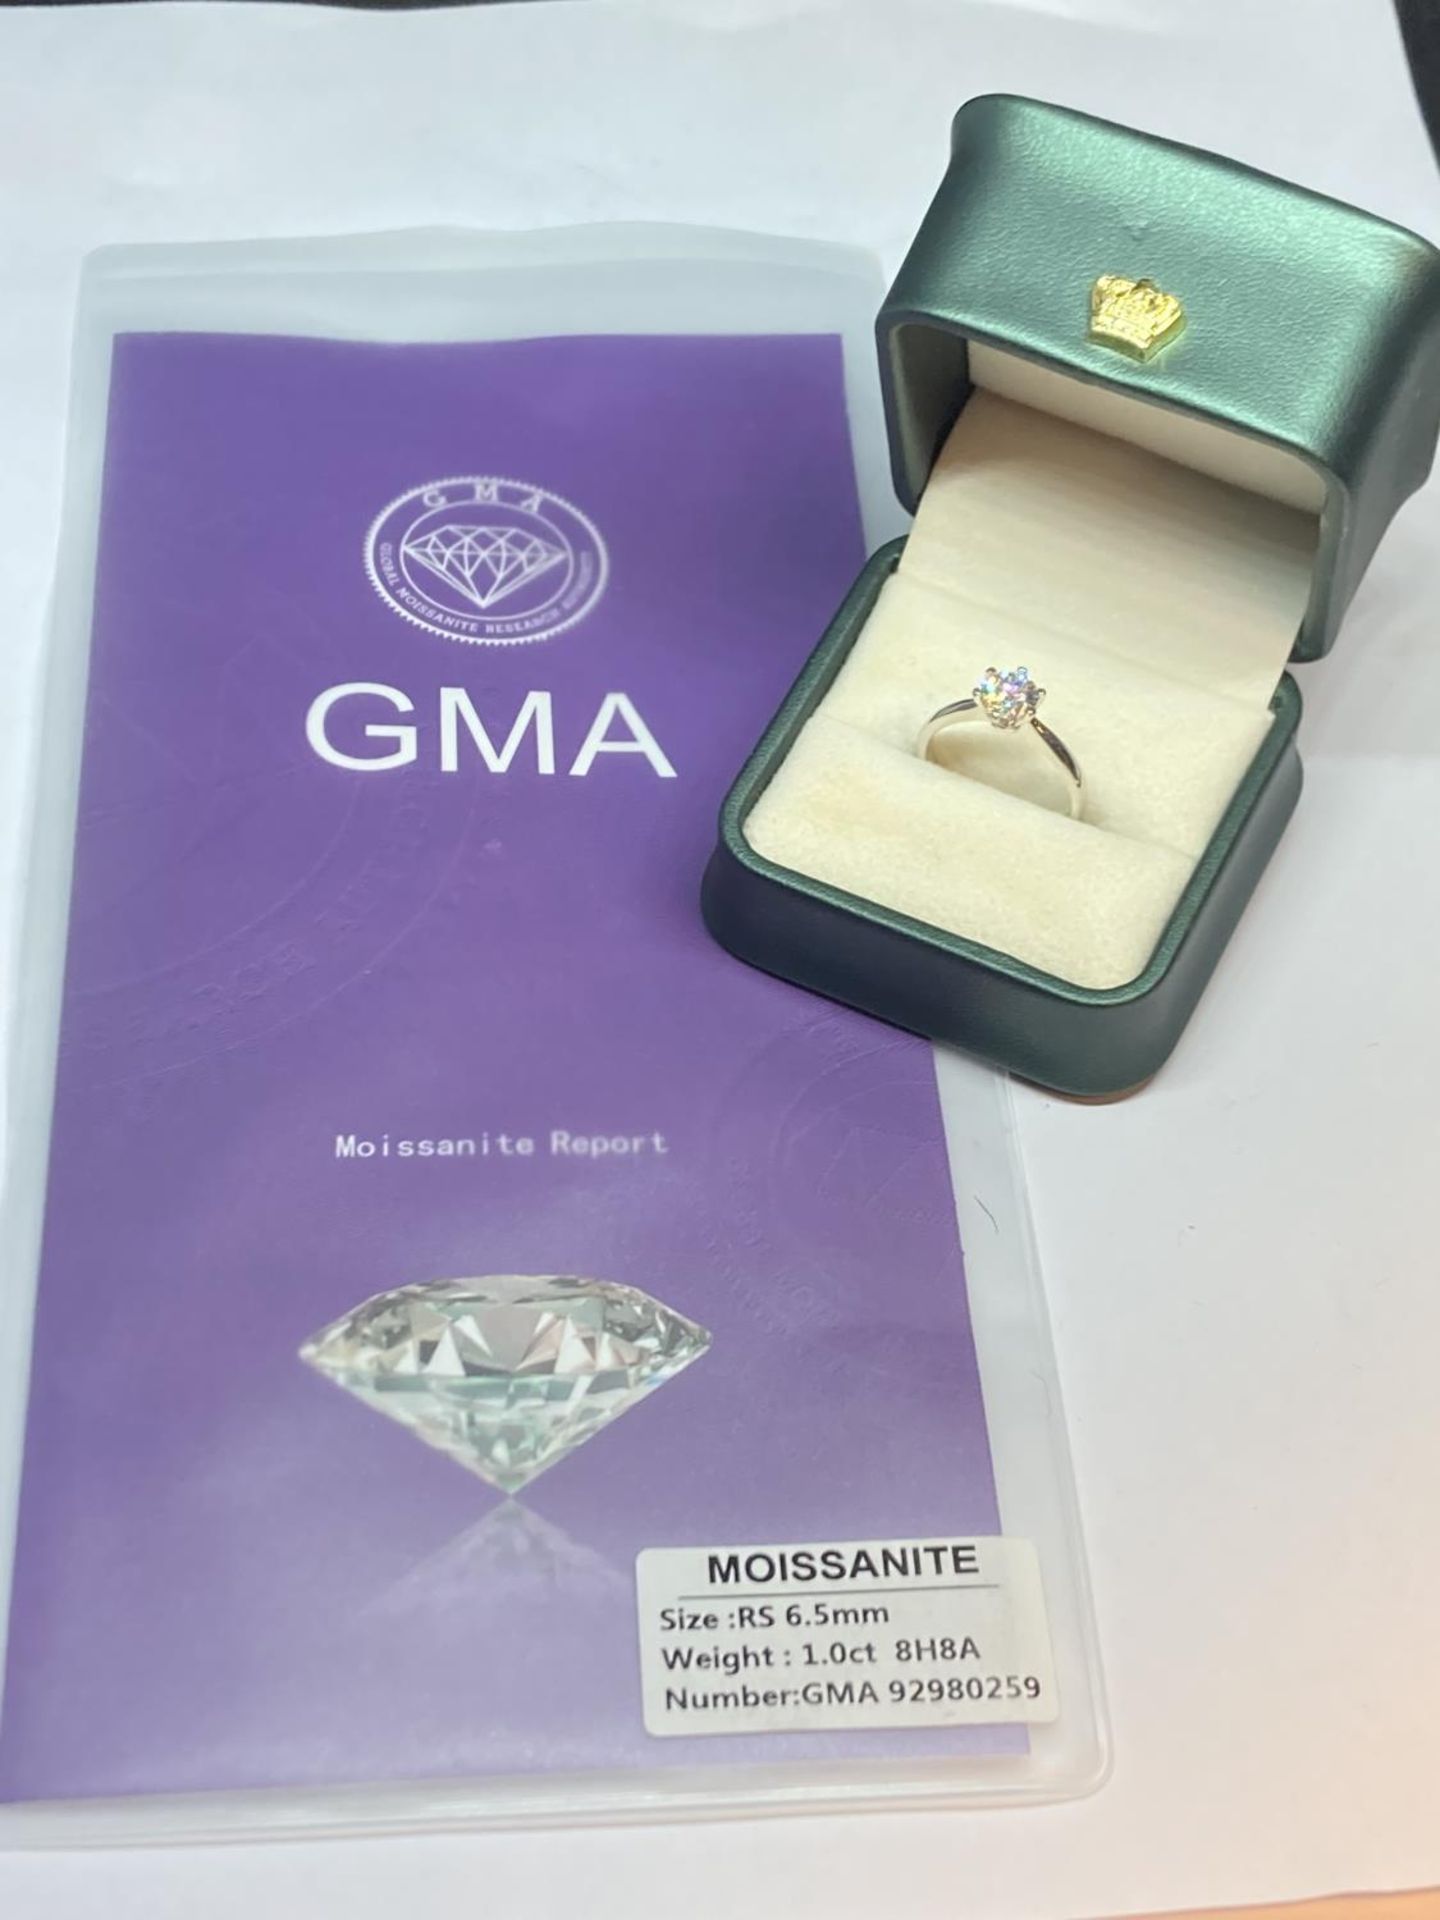 A MARKED 925 RING WITH A ONE CARAT MOISSANITE SIZE O/P COMPLETE WITH GMA MOISSANITE REPORT IN A